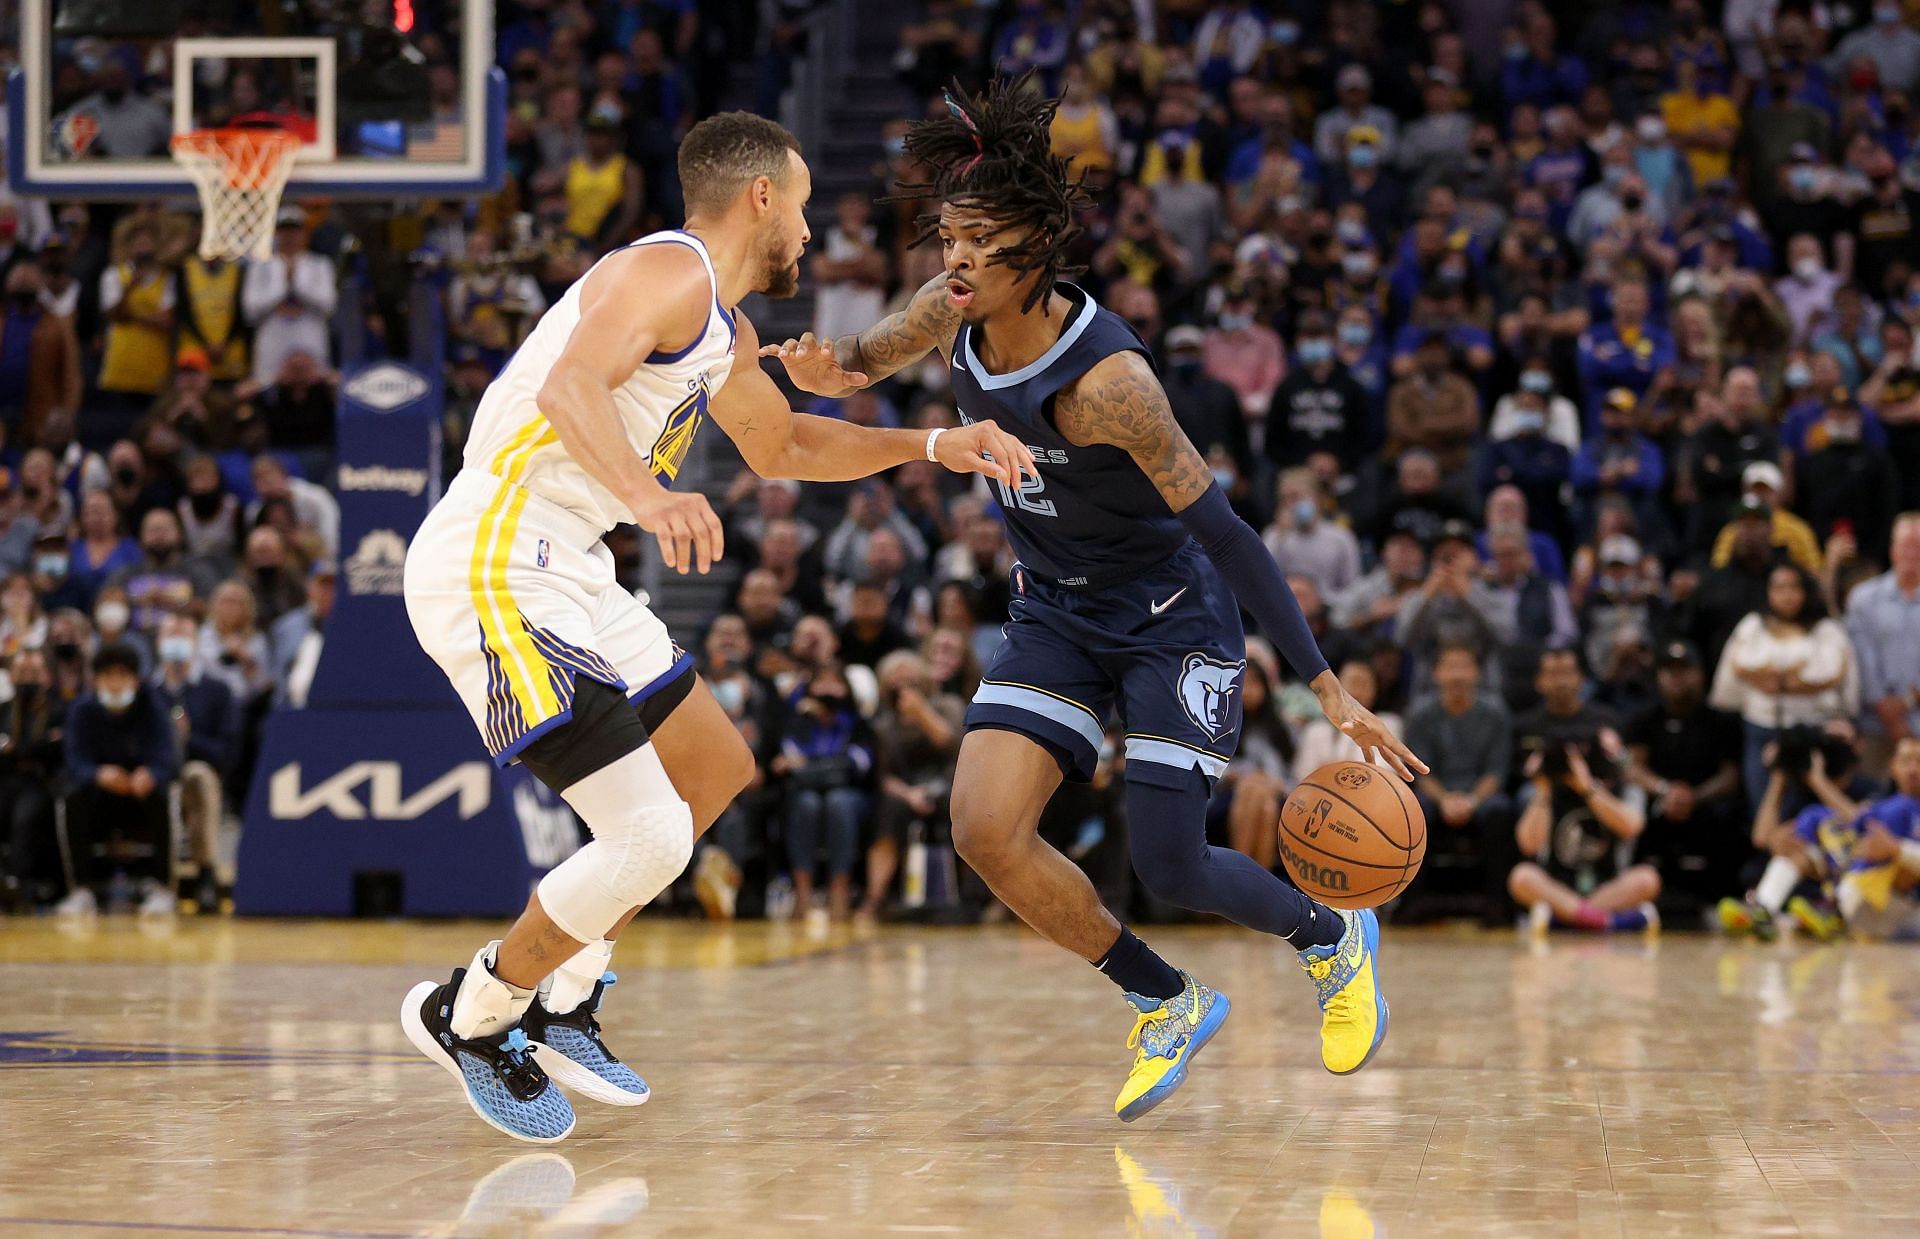 Ja Morant of the Memphis Grizzlies vs. Steph Curry of the Golden State Warriors